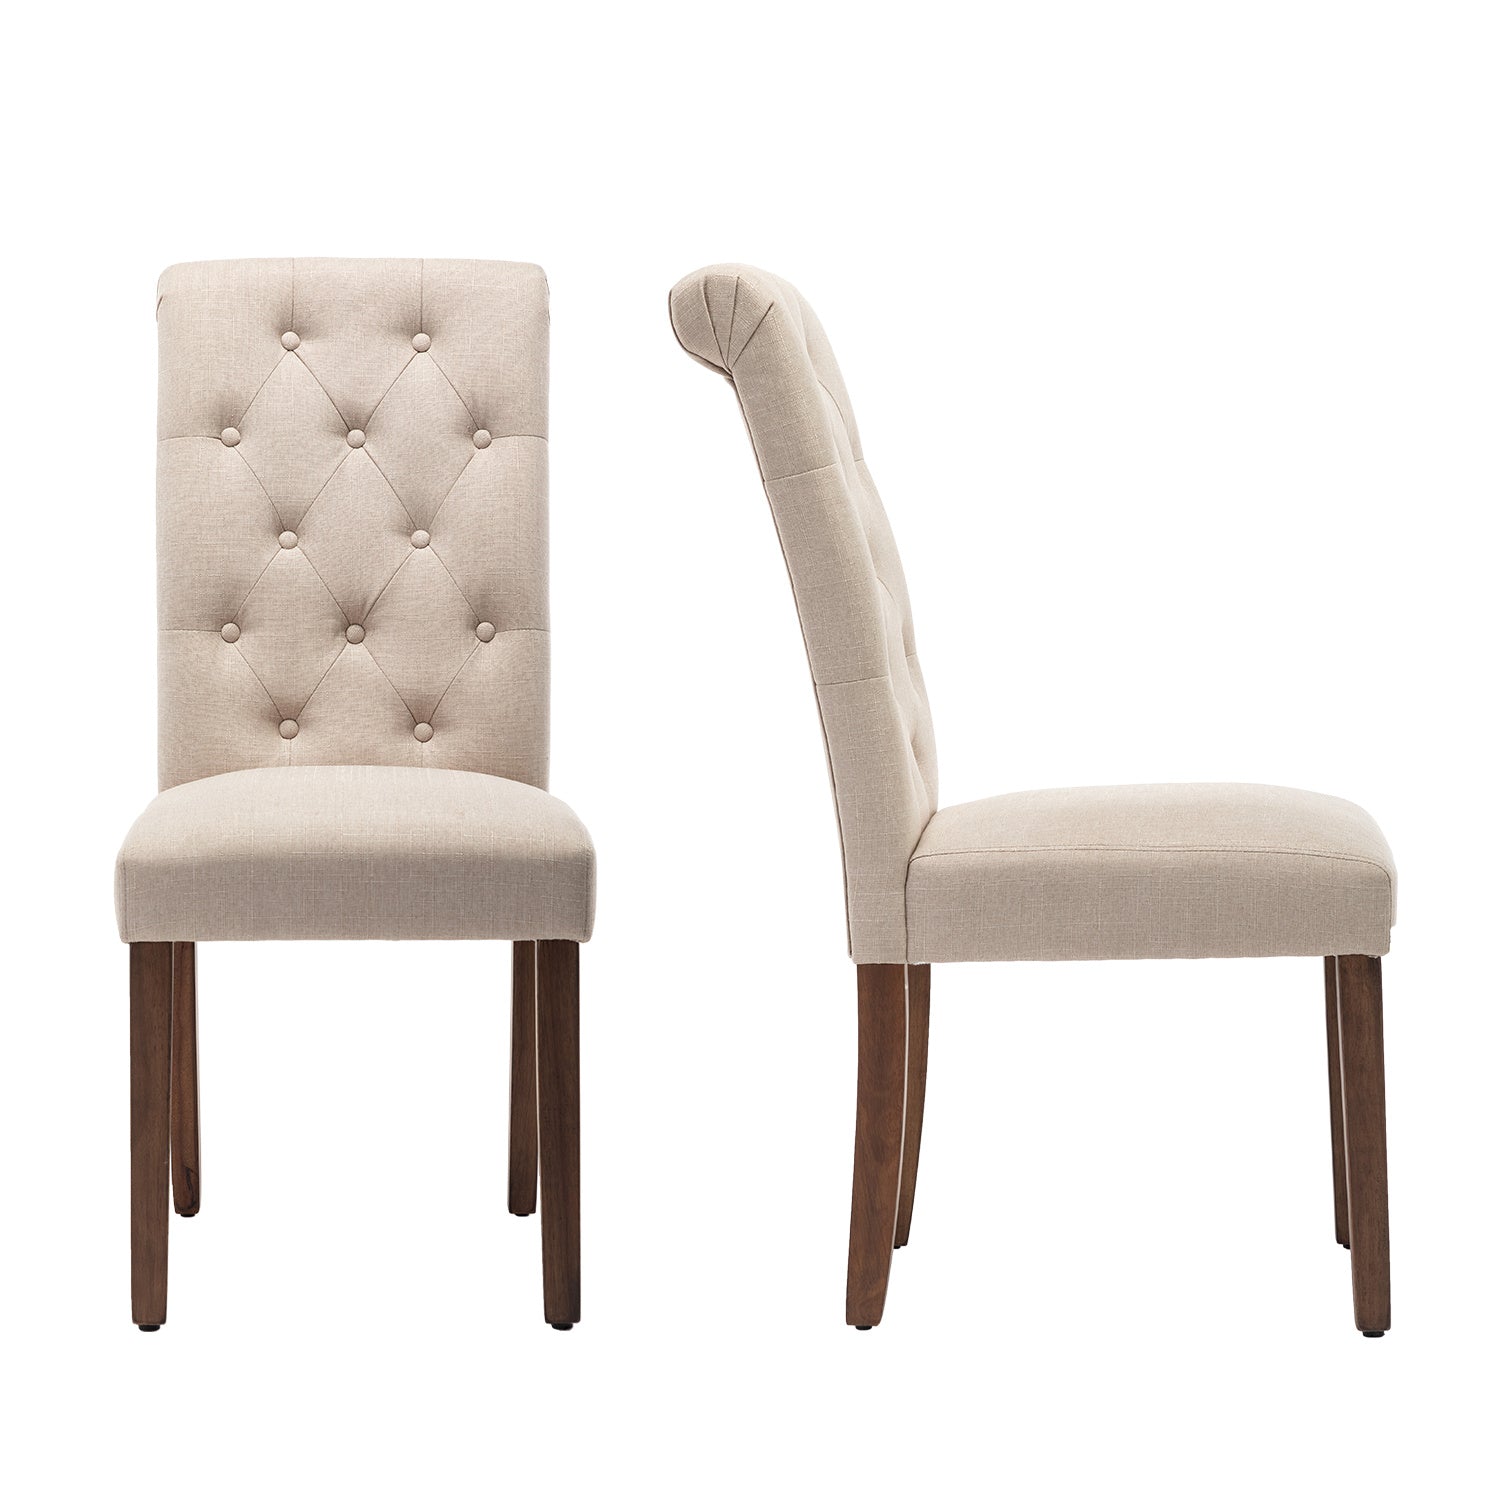 Free Shipping Qwork Furniture Classic Fabric Dining Chair with Wooden Legs - Set of 2